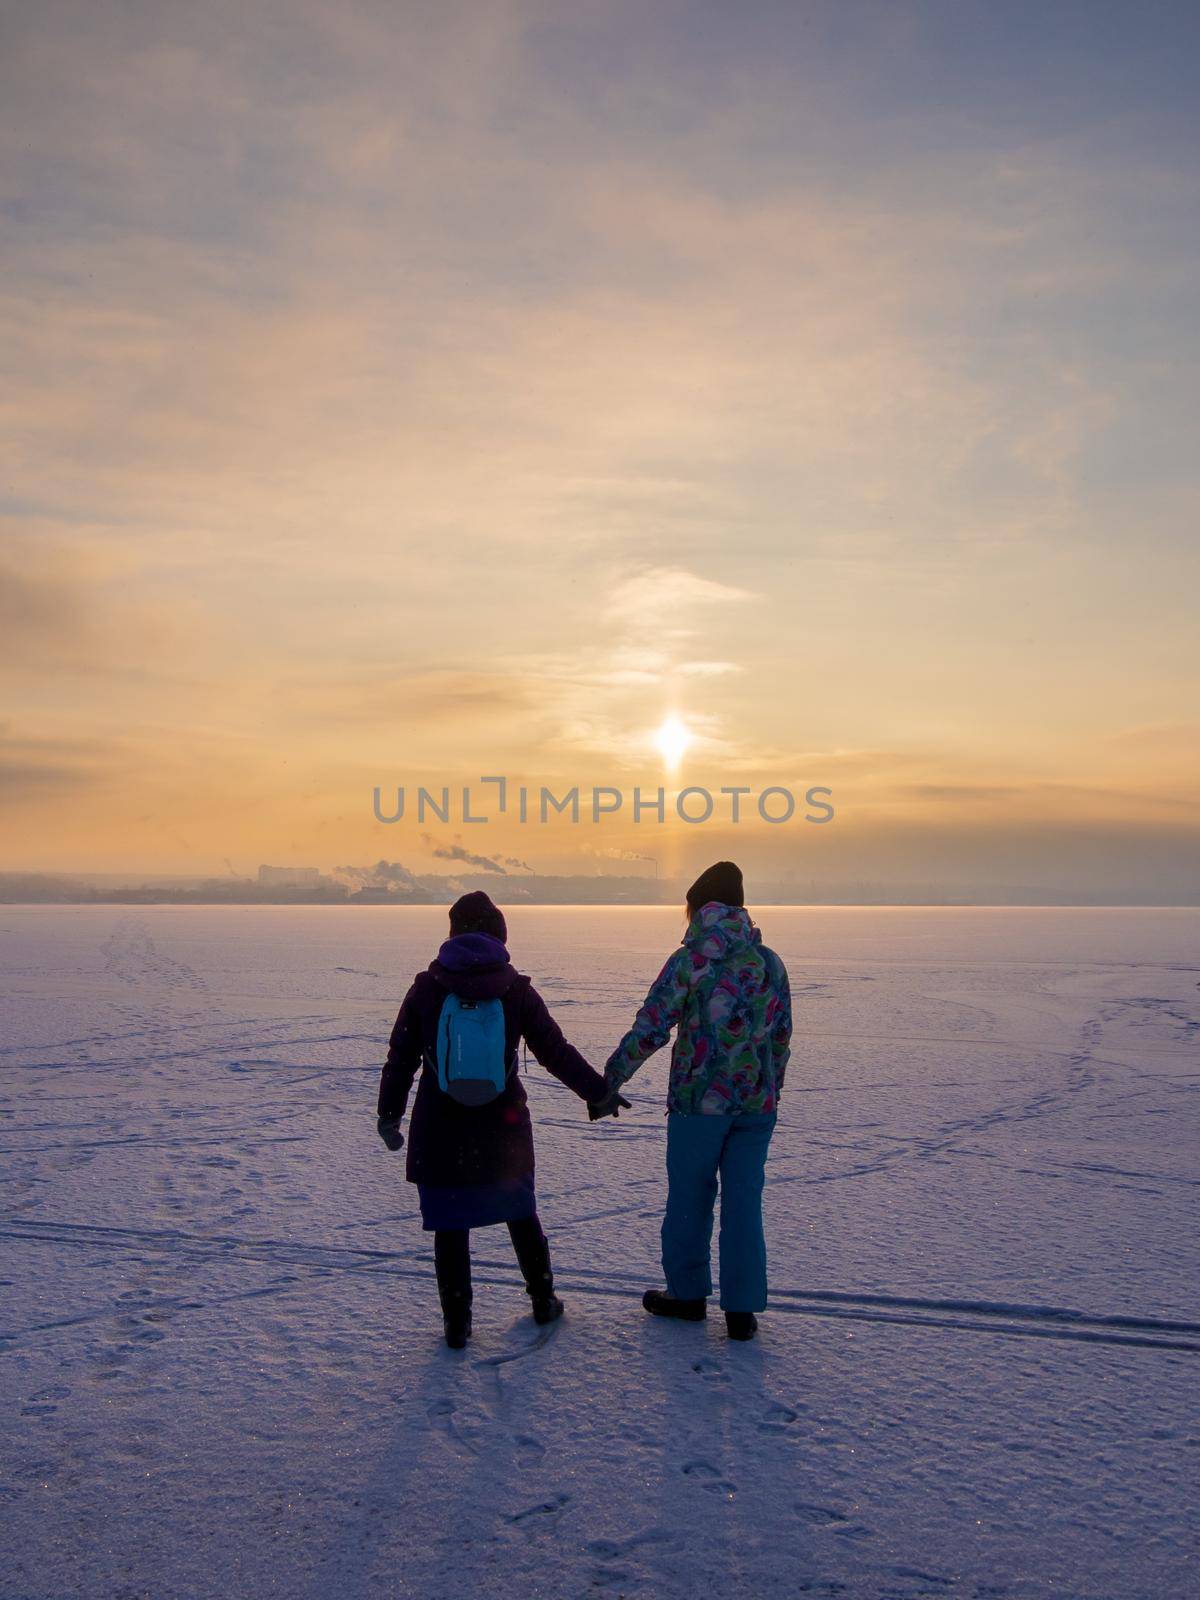 Two girls go into the sunset along the frozen river by Andre1ns